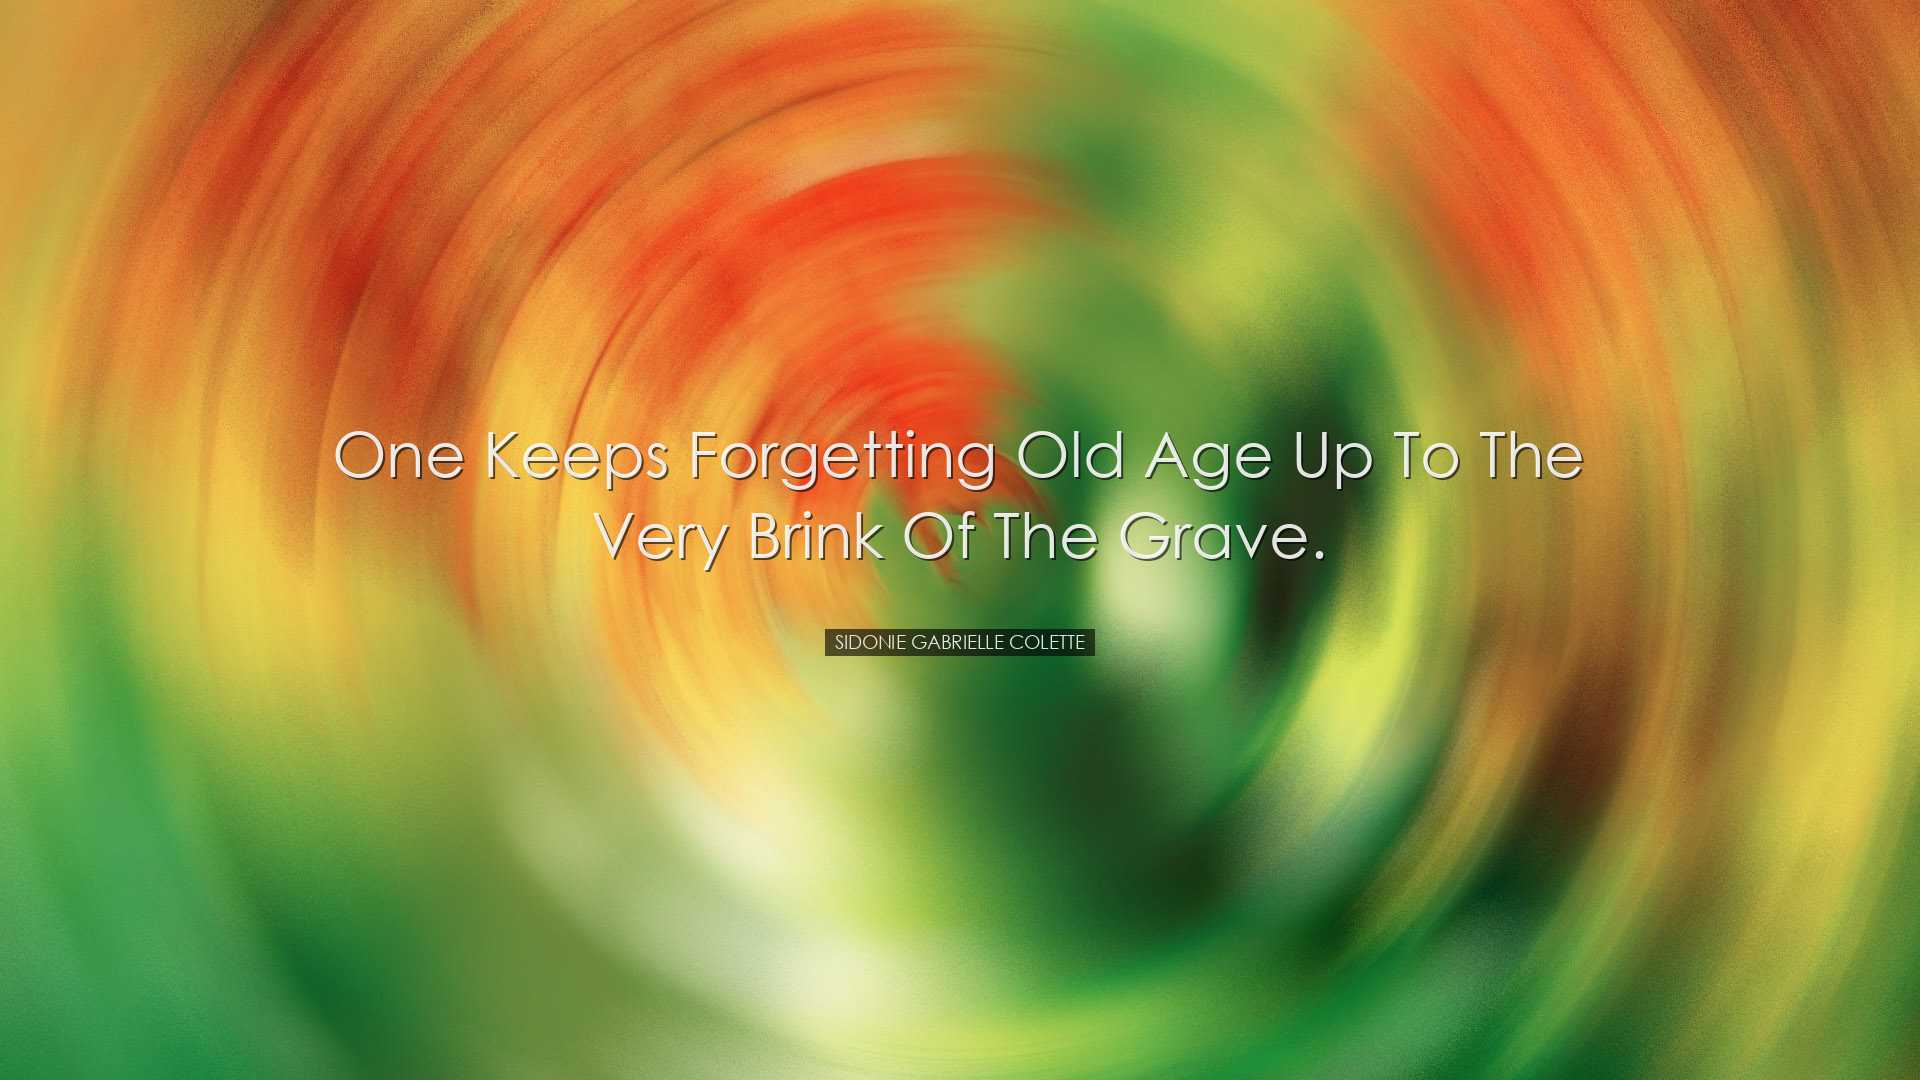 One keeps forgetting old age up to the very brink of the grave. -